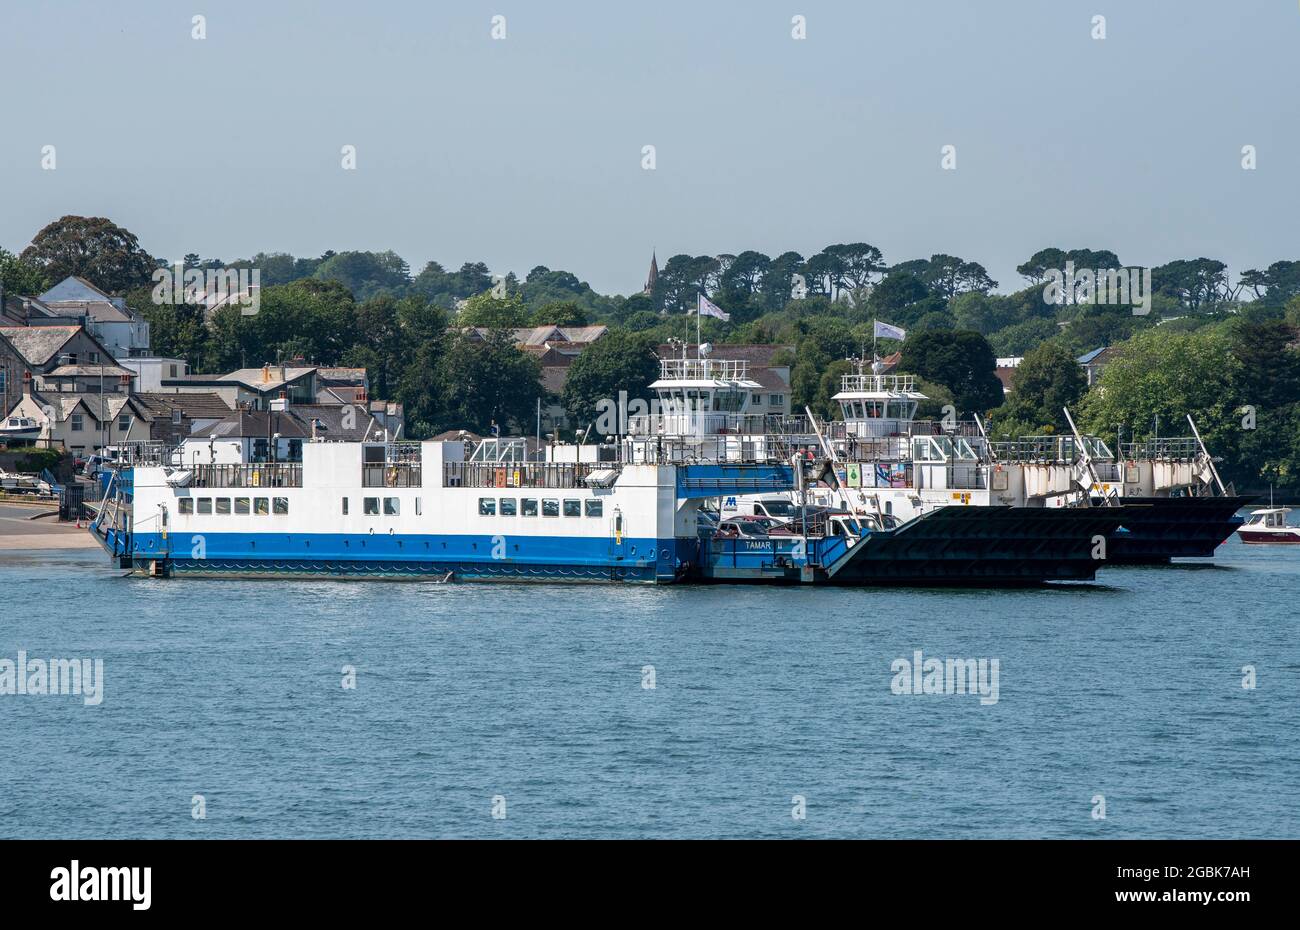 Torpoint, Cornwall, England, UK. 2021. Roro ferry departing Torpoint bound for Plymouth, Devon a service that during summer months runs every few minu Stock Photo